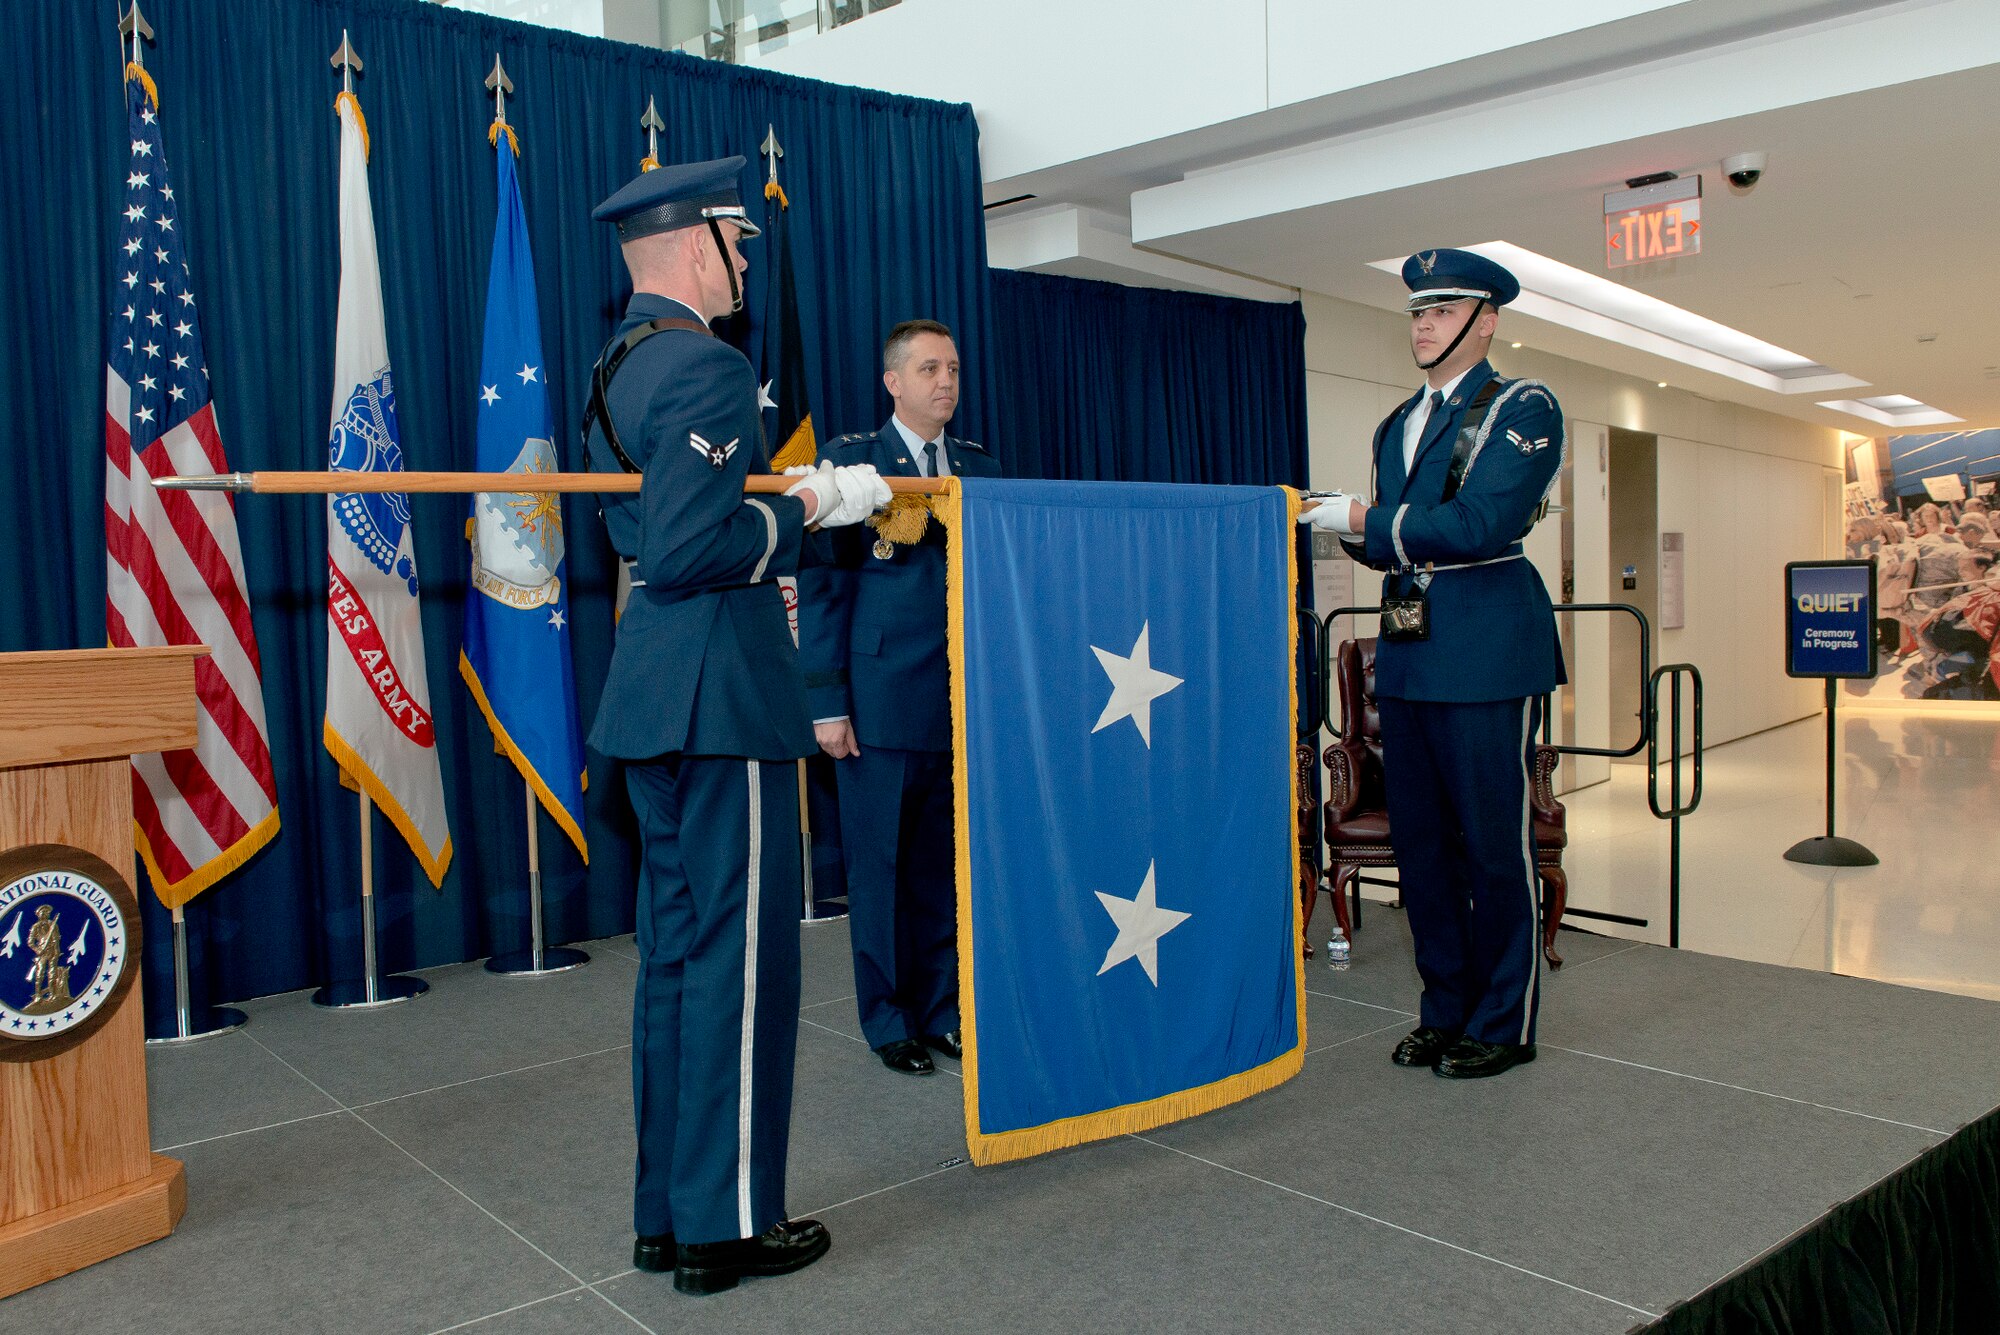 The Joint Base Andrews Honor Guard unfurls colors for Air National Guard Readiness Center Commander Maj. Gen. Michael R. Taheri, during his promotion ceremony January 2, 2017, at Joint Base Andrews, Maryland. Taheri, who has commanded the Readiness Center for the past 18 months, was promoted to the rank of major general. (U.S. Air National Guard photo by Staff Sgt. John E. Hillier)